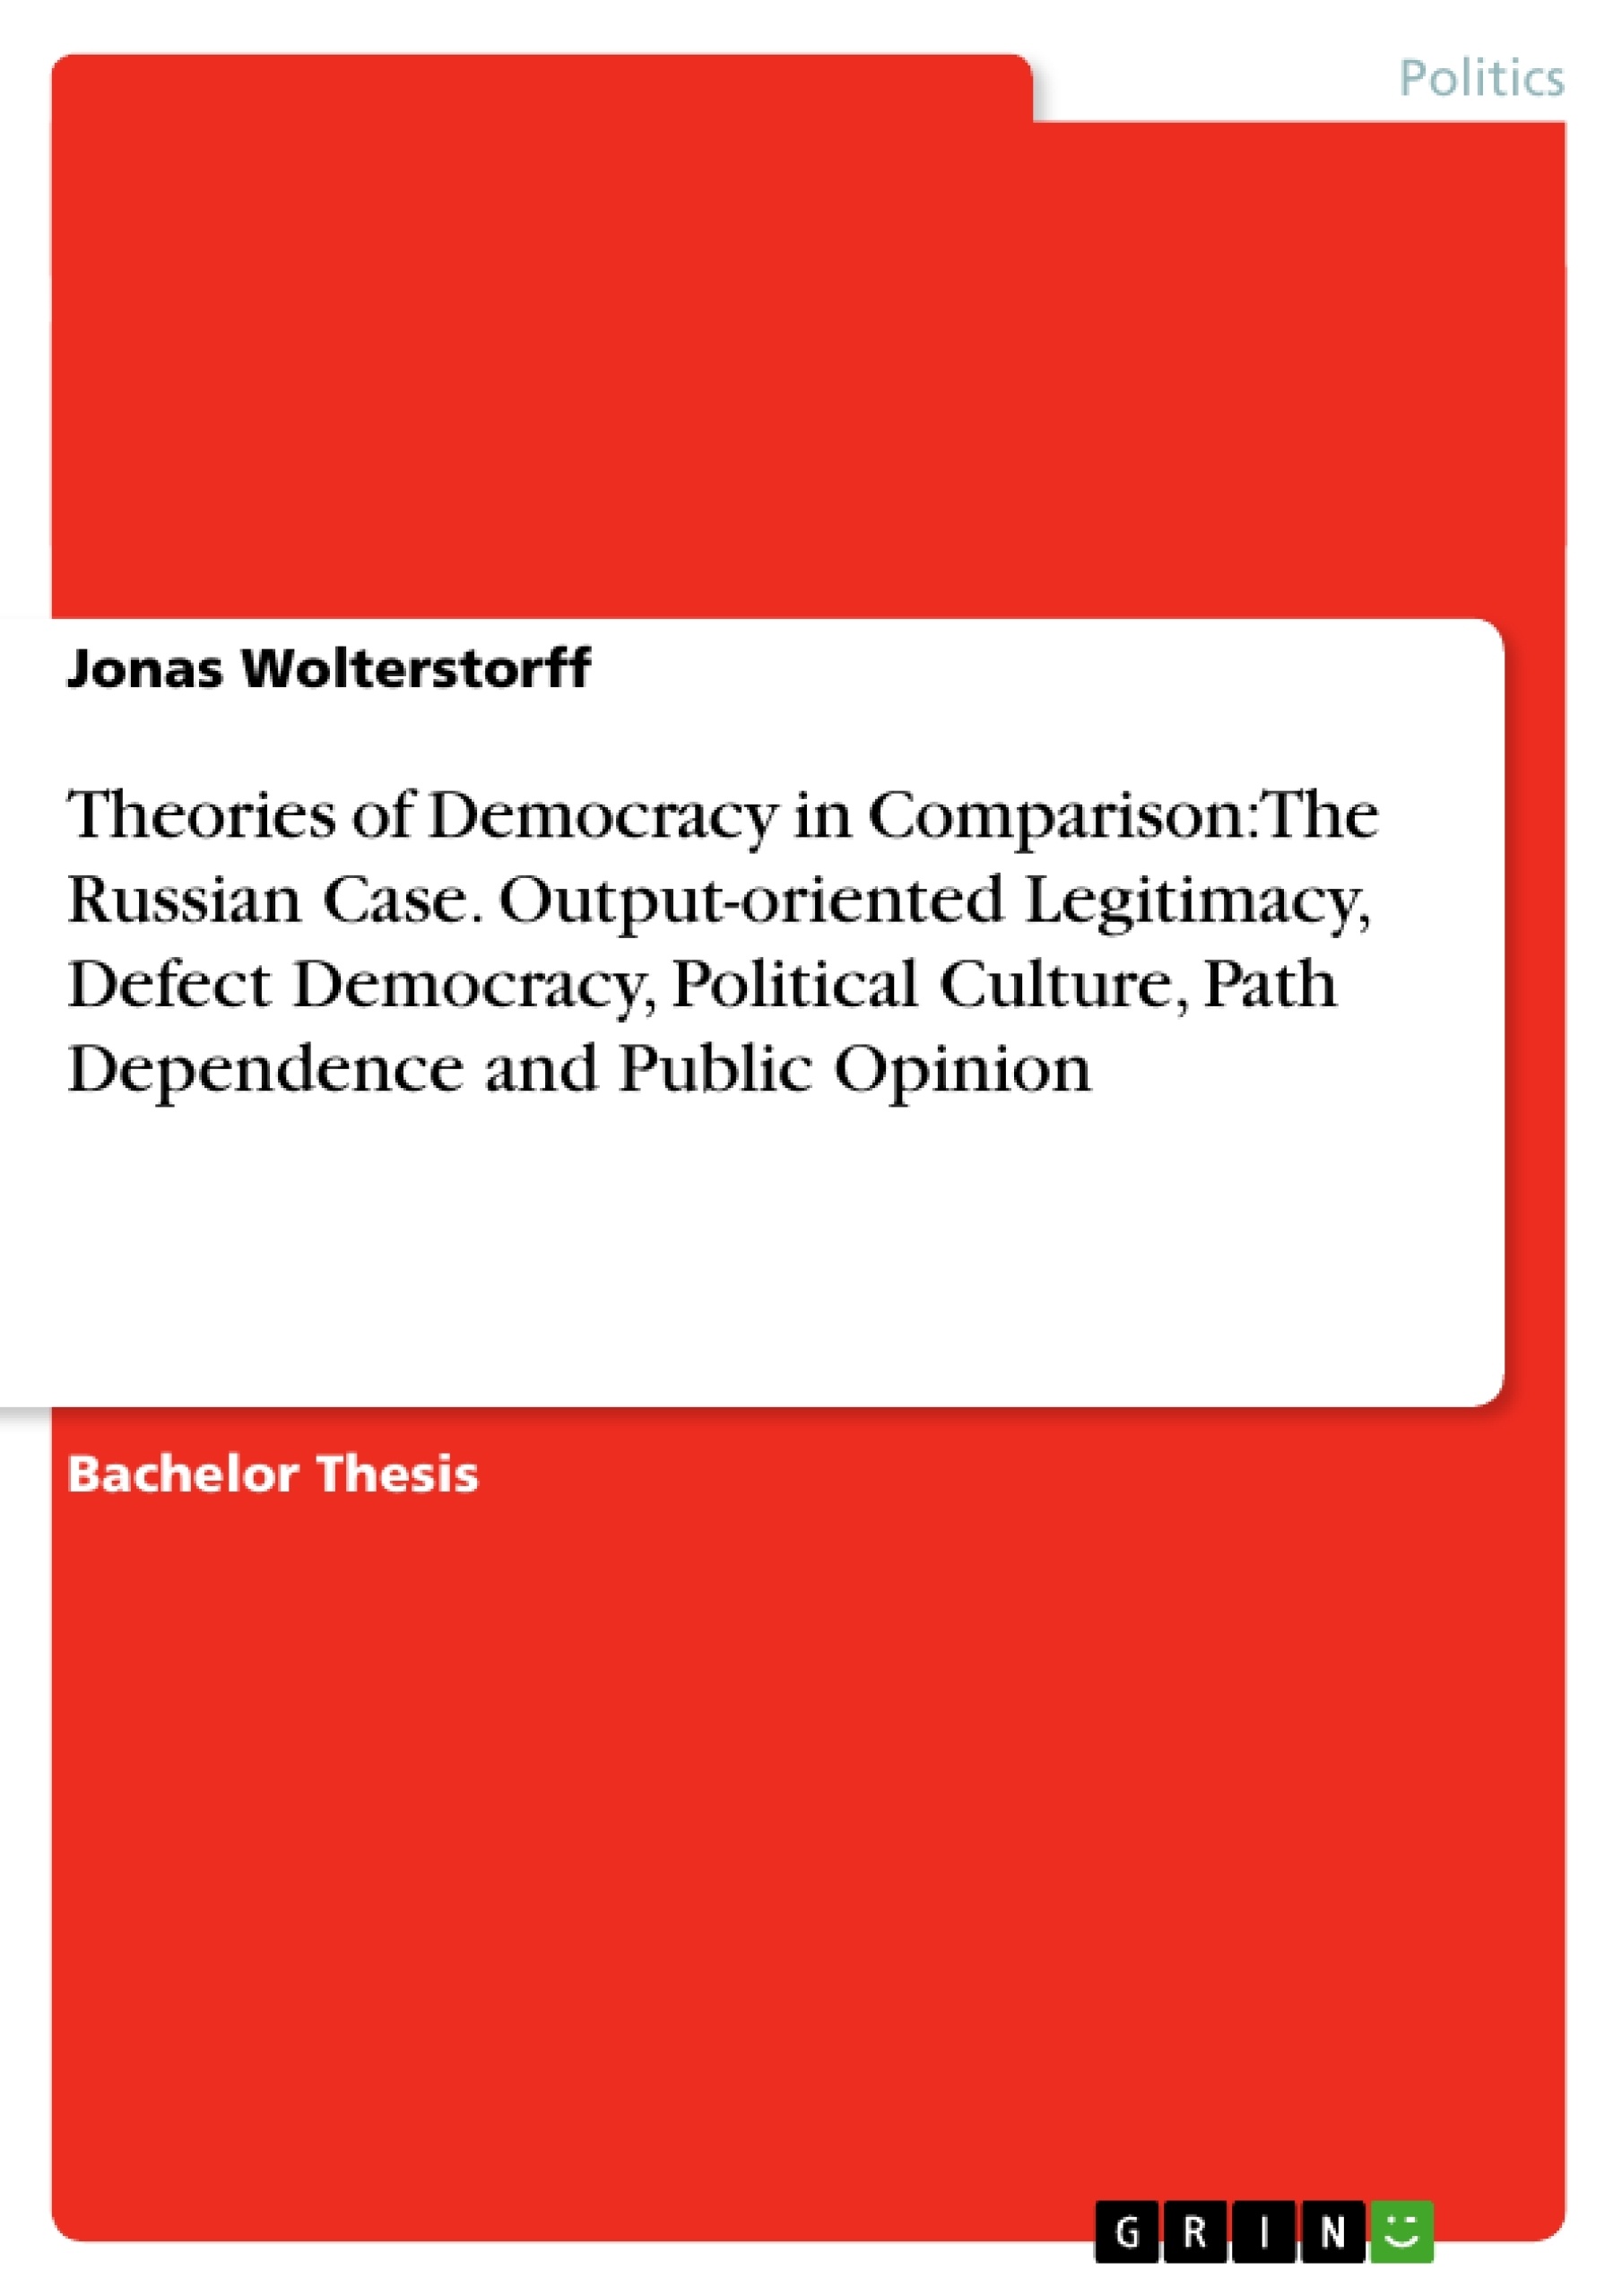 Title: Theories of Democracy in Comparison: The Russian Case. Output-oriented Legitimacy, Defect Democracy, Political Culture, Path Dependence and Public Opinion